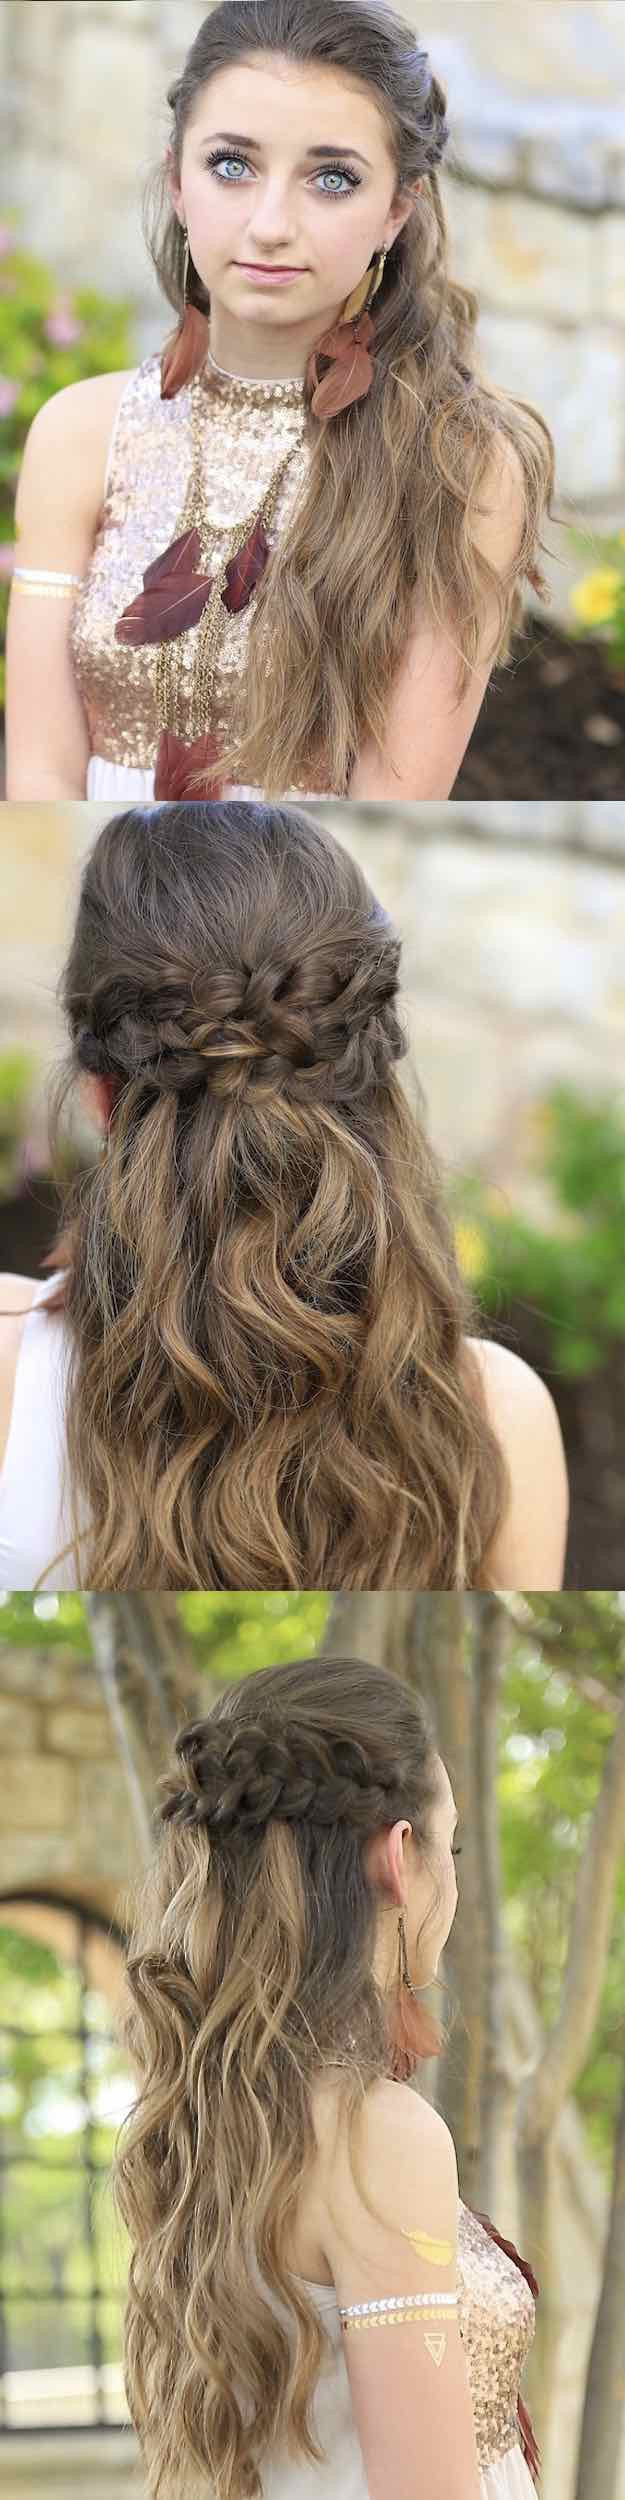 Prom Down Hairstyles
 25 Easy Half Up Half Down Hairstyle Tutorials For Prom